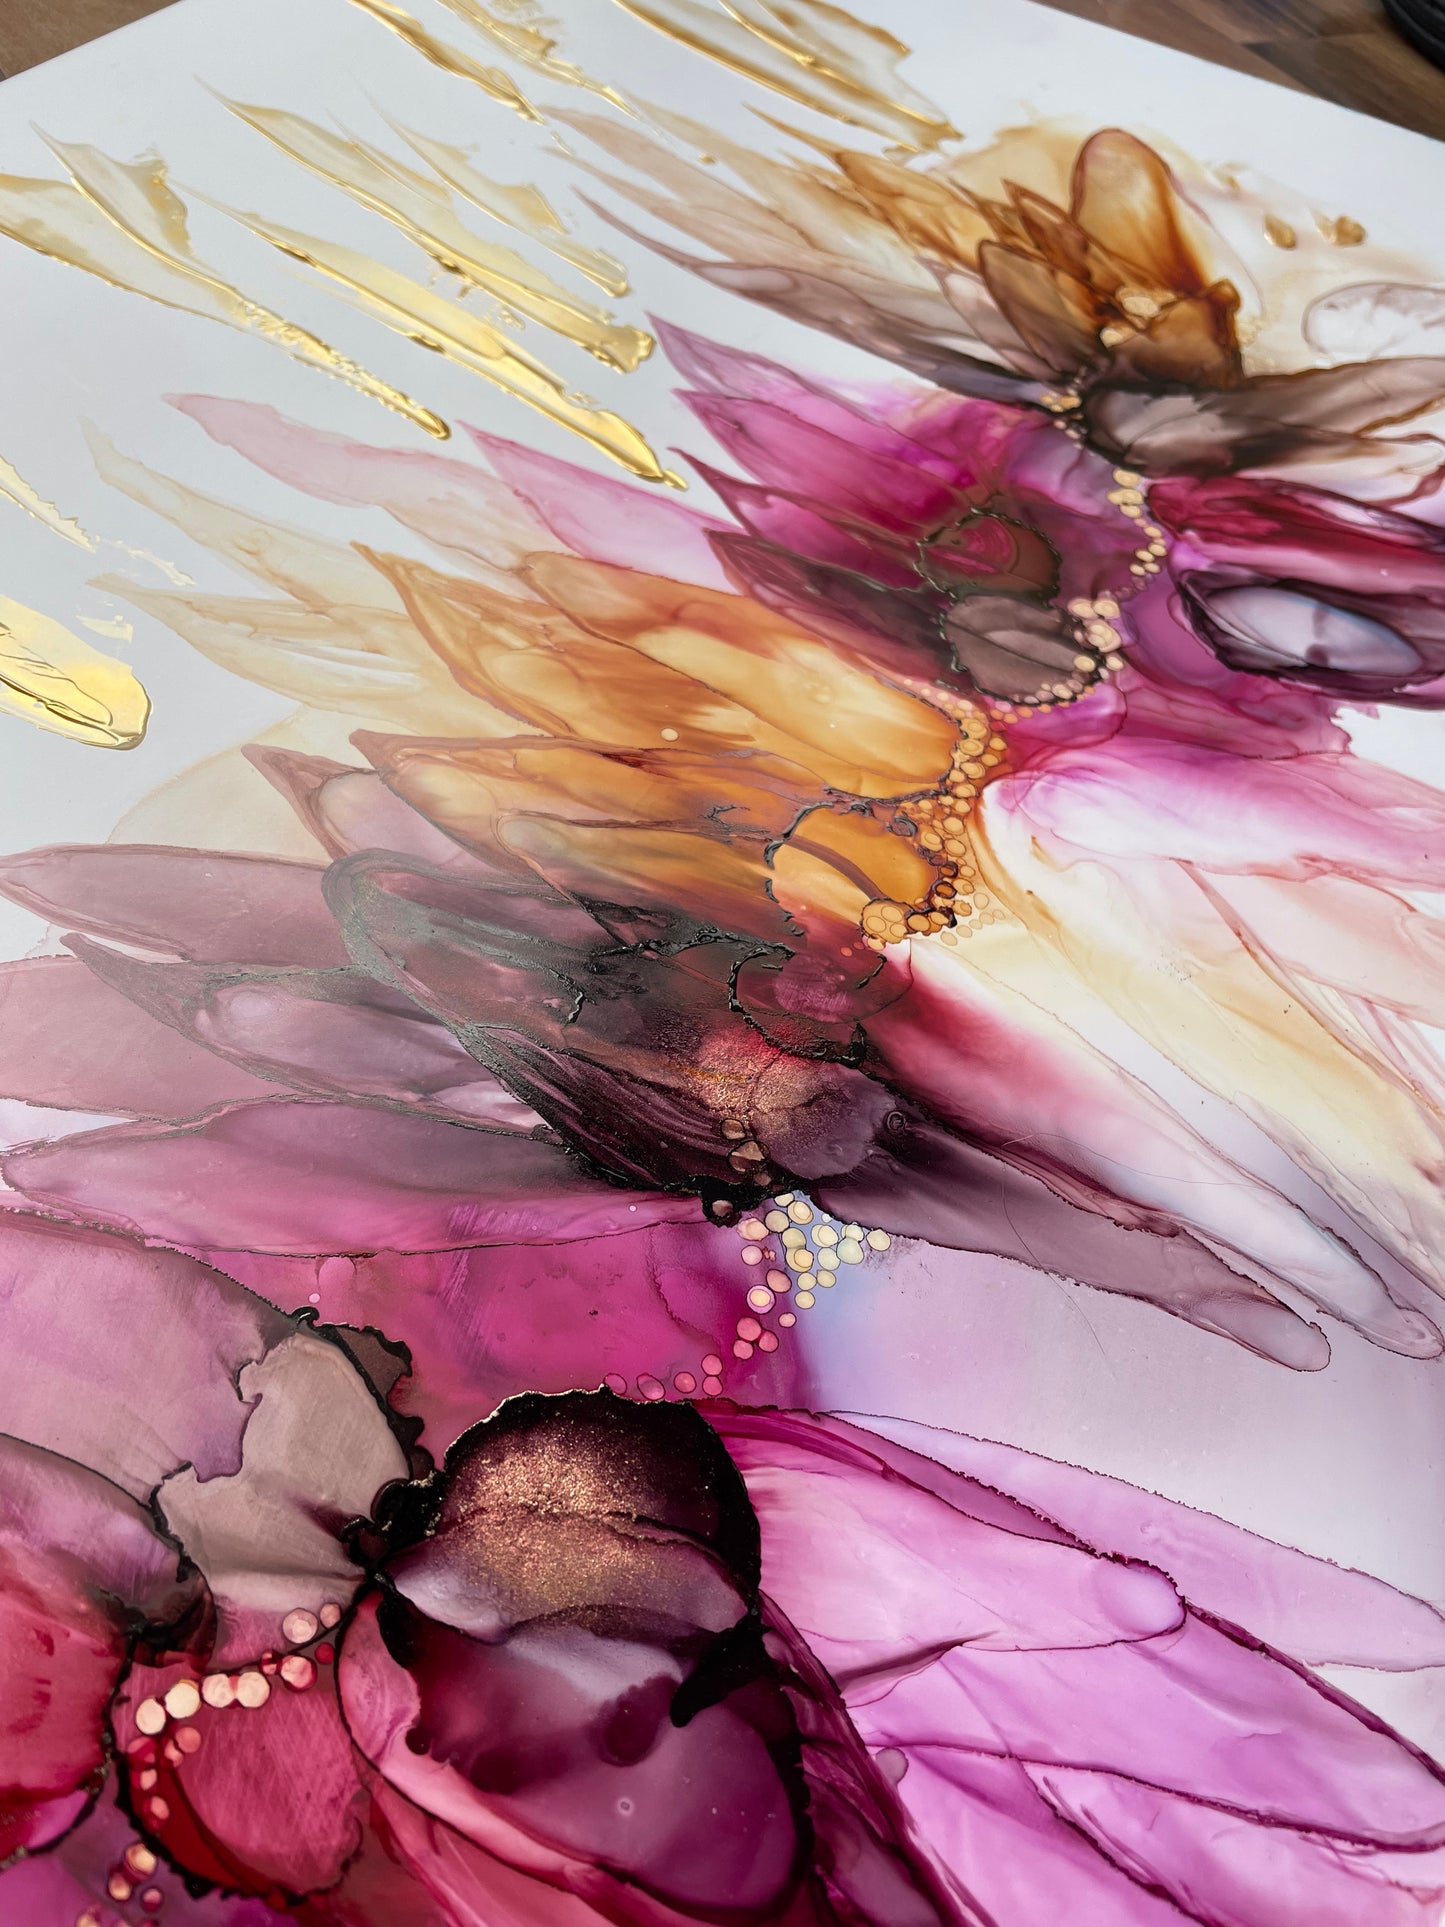 Glorious I Large floral textured abstract artwork in pink, purple and gold.